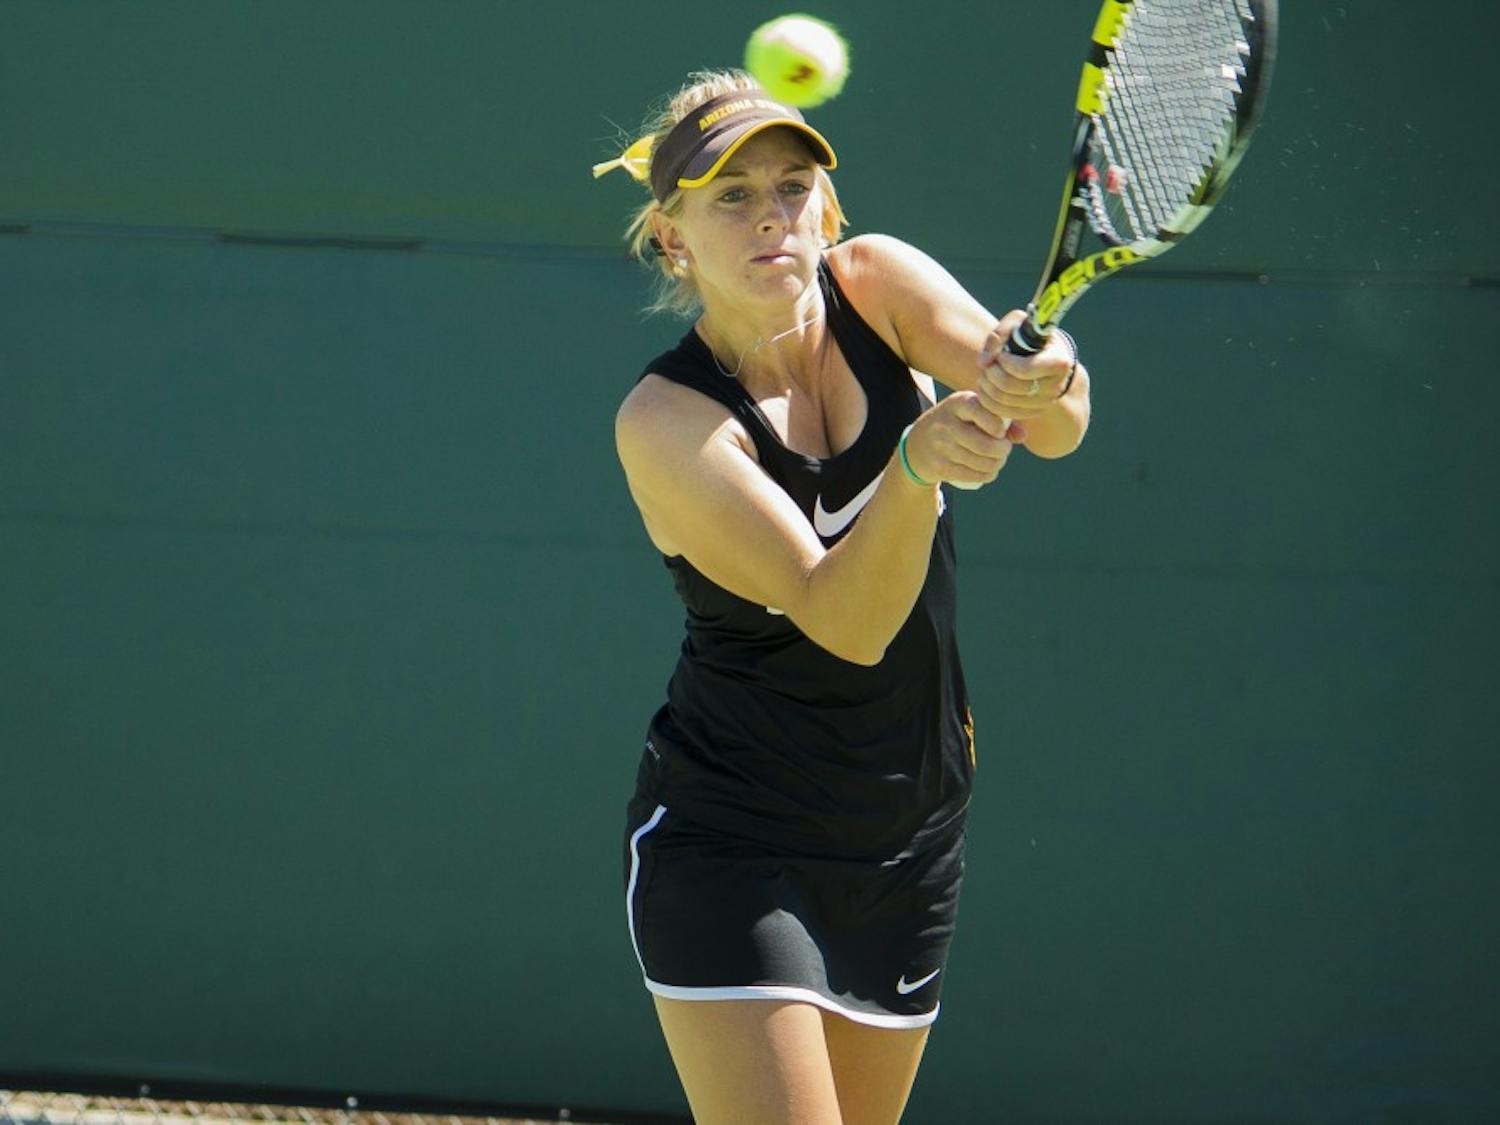 ASU Senior Joanna Smith returns with a backhand during her 4-6 6